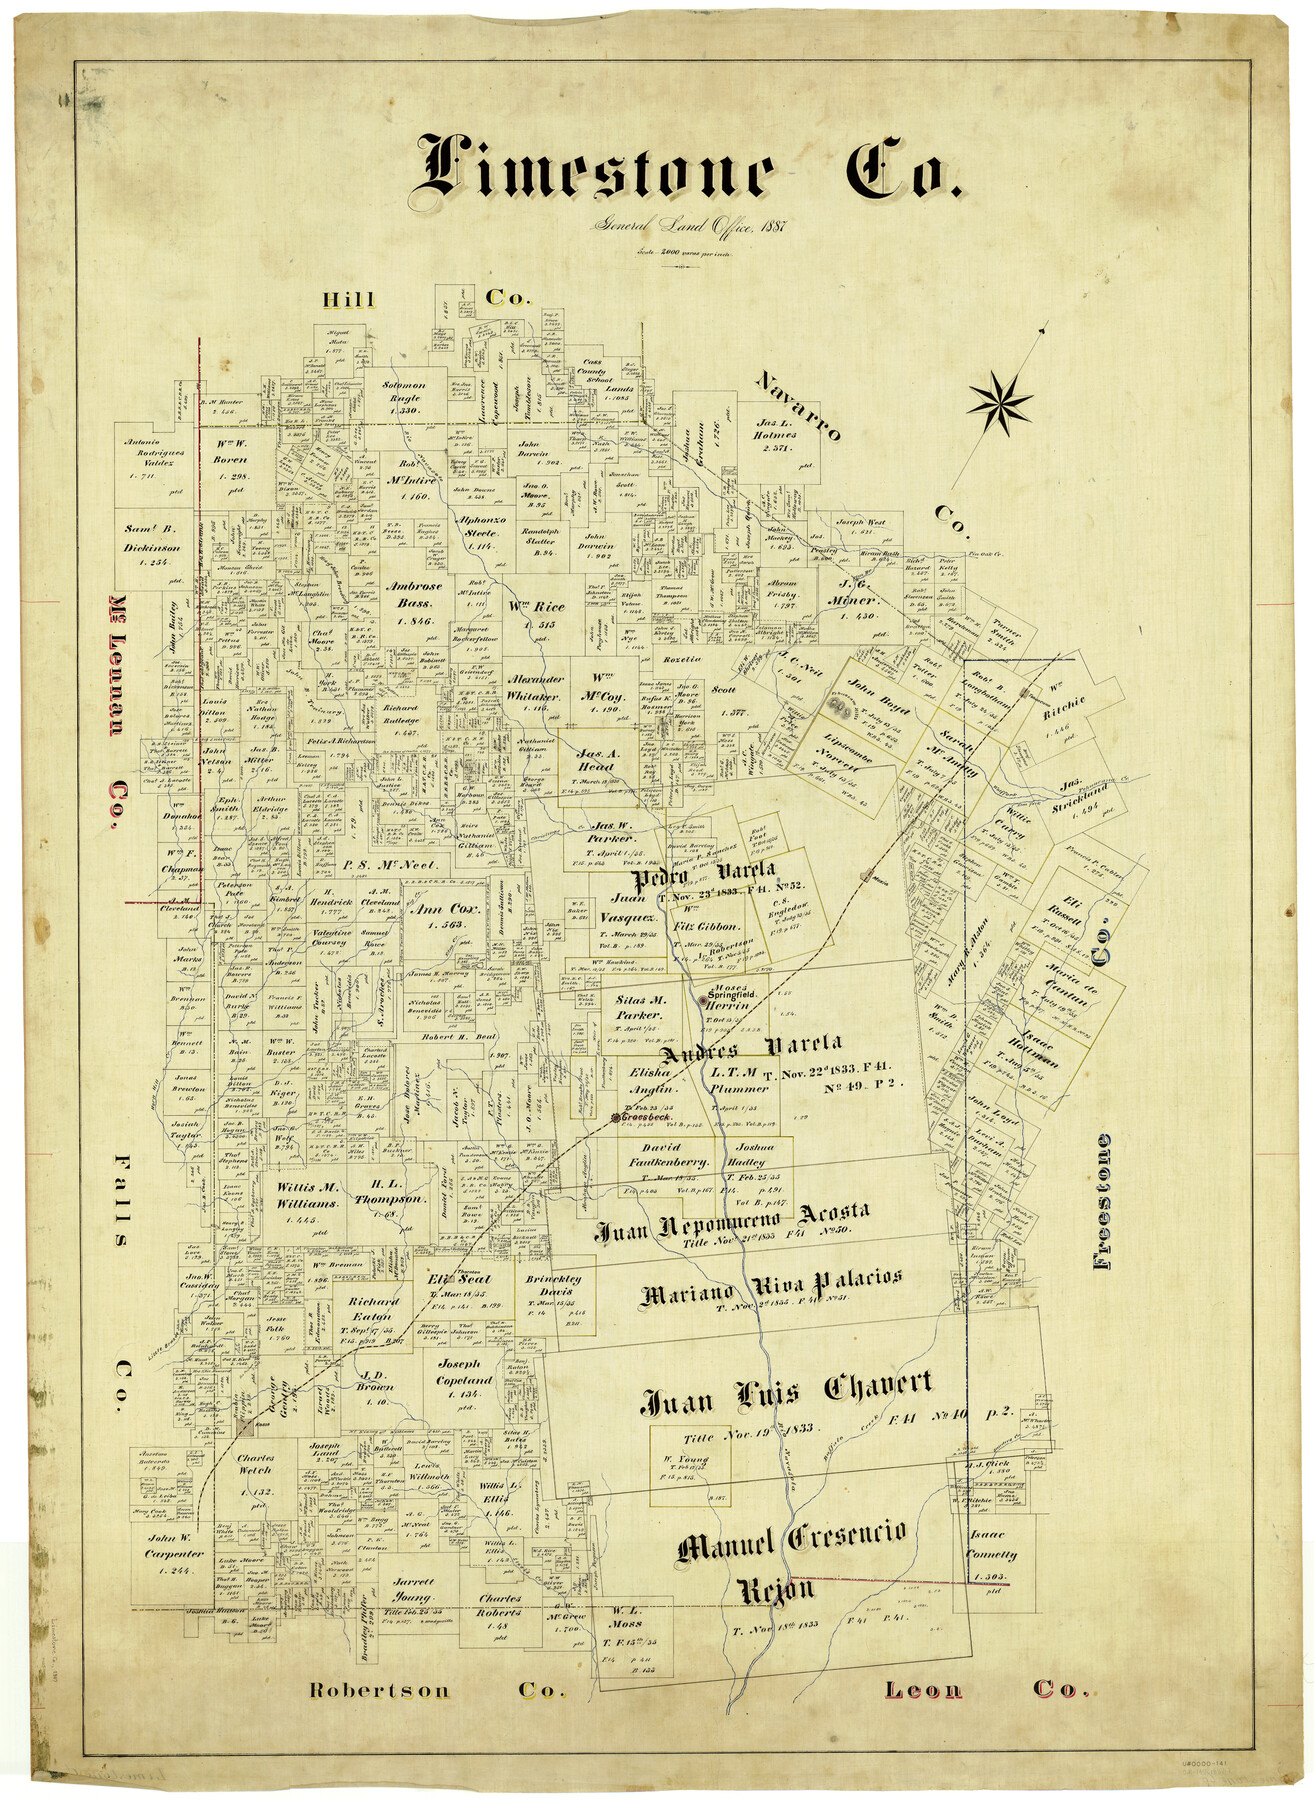 5016, Limestone Co., General Map Collection